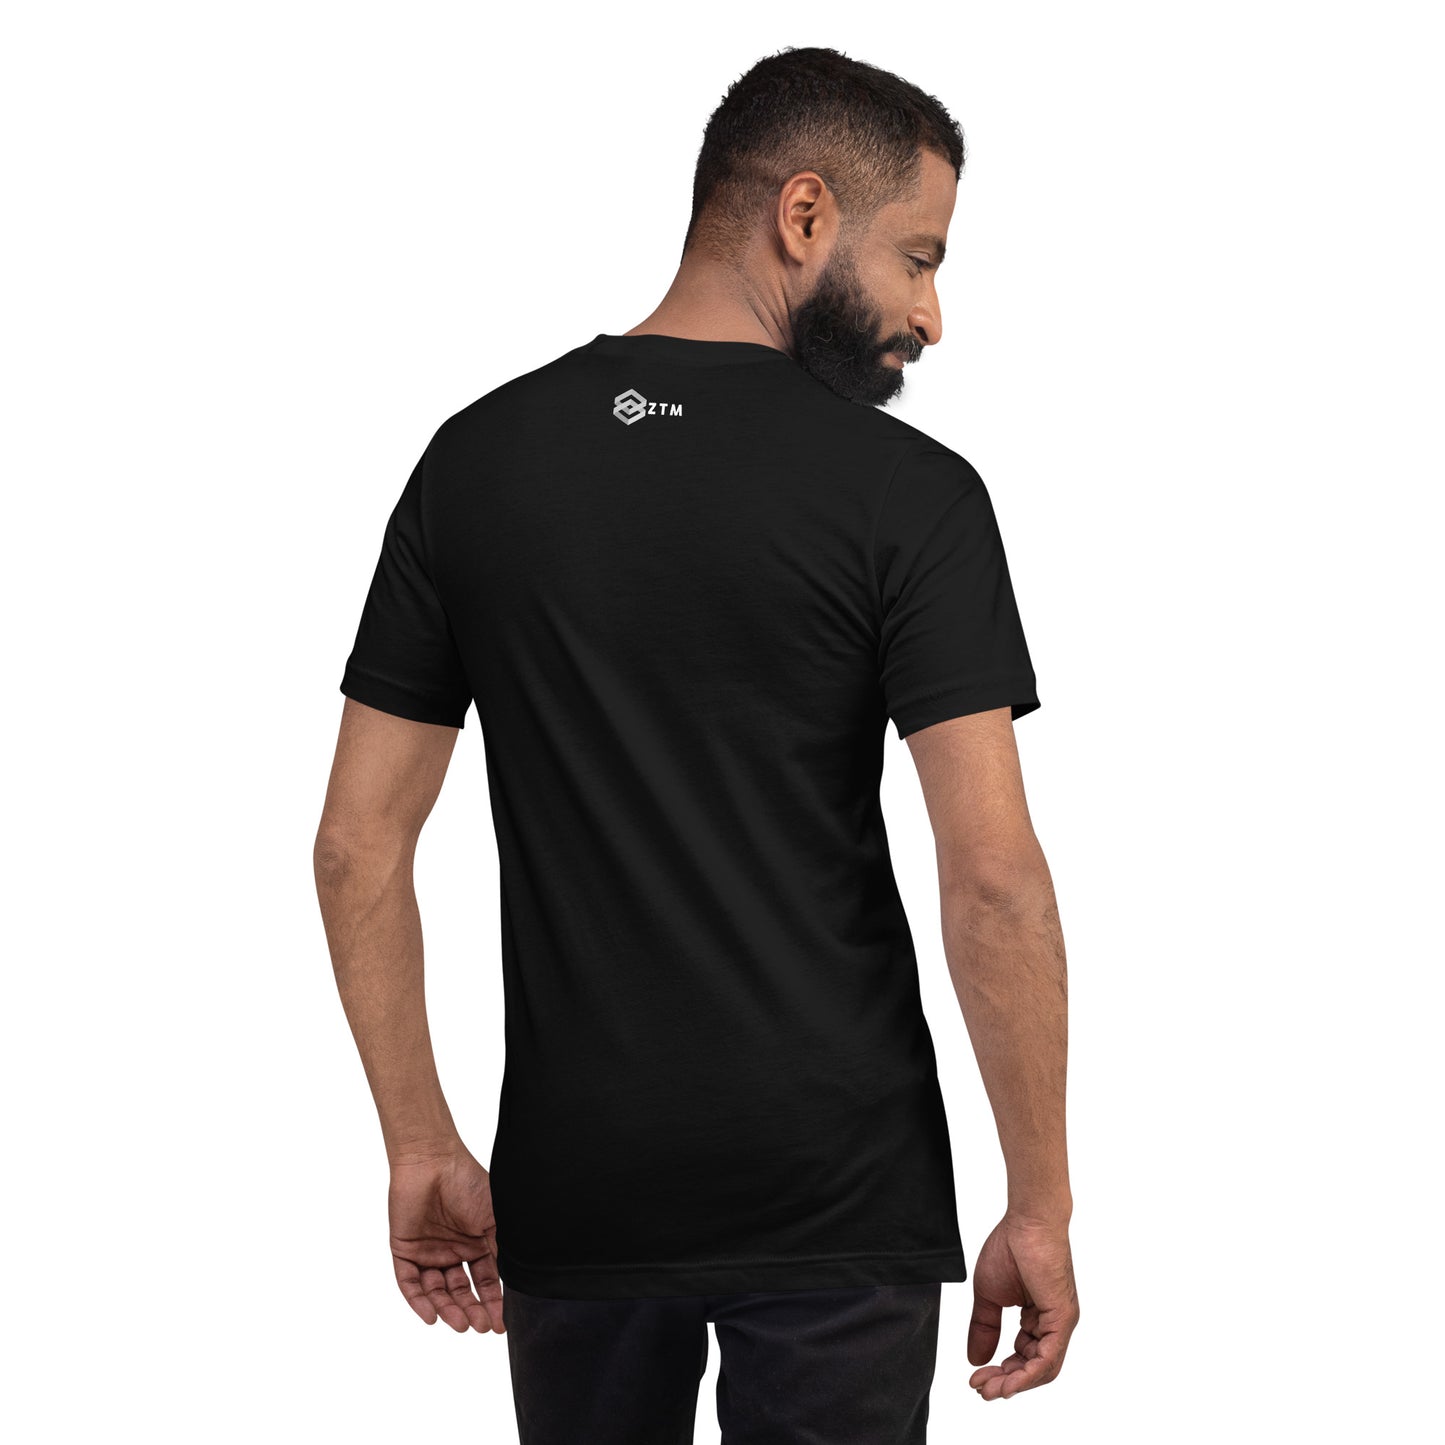 The 'ZTM lifestyle' (dark mode // casual fit) t-shirt